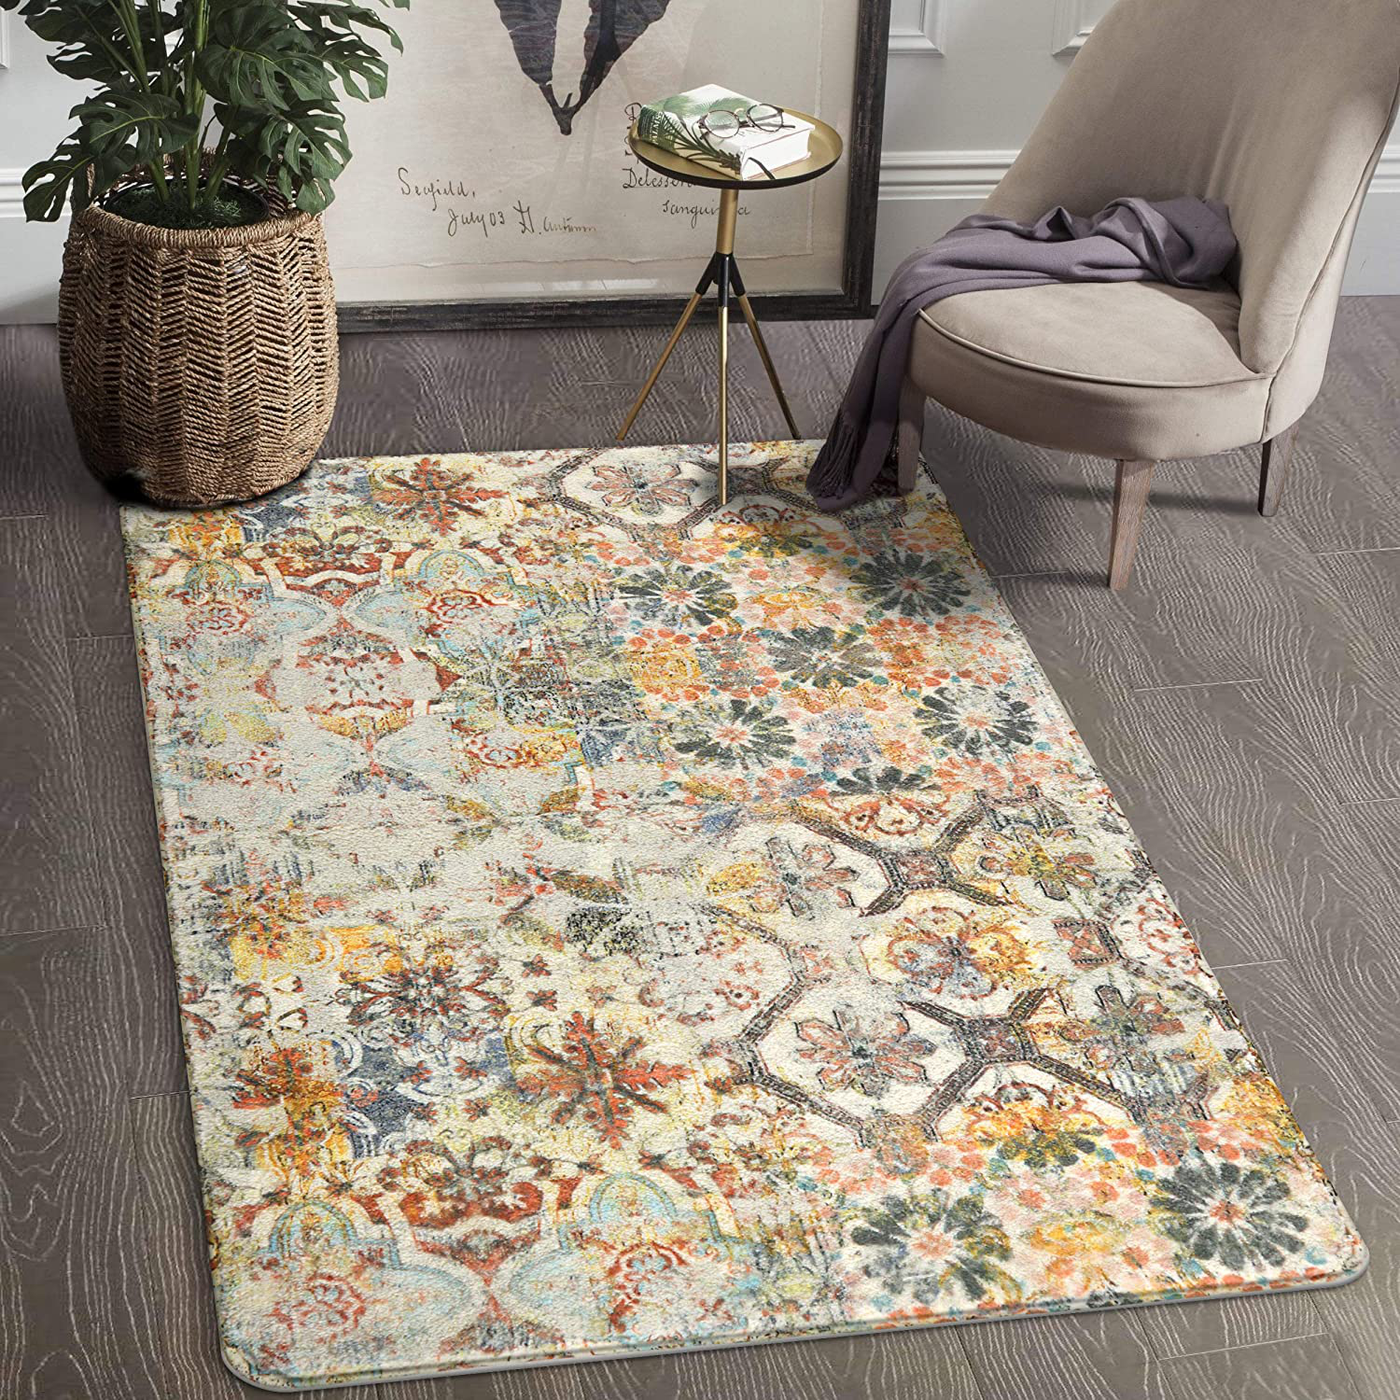 Lahome Floral Medallion Collection Area Rug - 4’ X 6’ Non-Slip Distressed Bohemian Vintage Traditional Area Rug Accent Throw Rugs Floor Carpet for Living Room Bedrooms Decor (4' x 6', Multicolor)